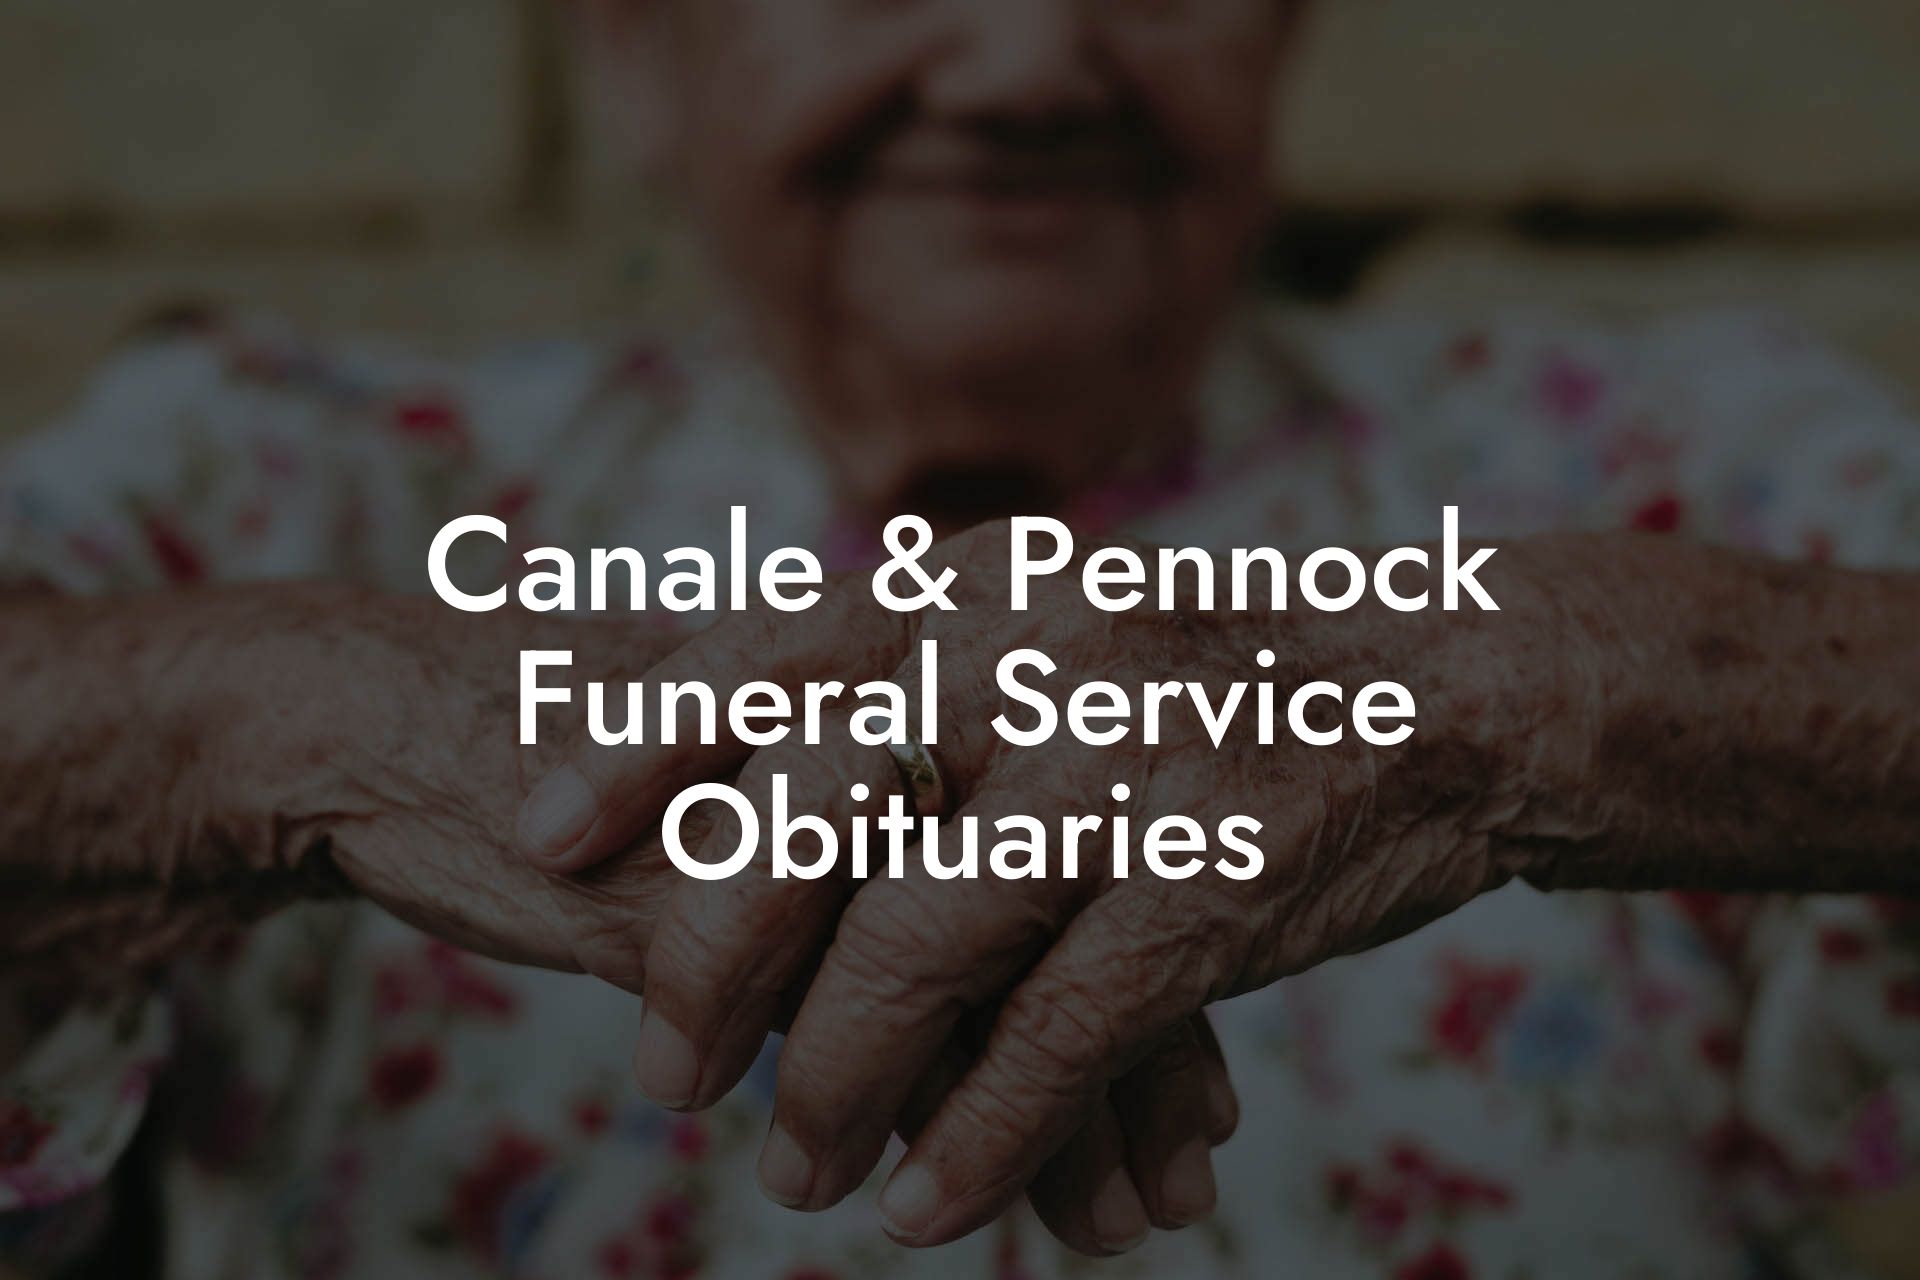 Canale & Pennock Funeral Service Obituaries